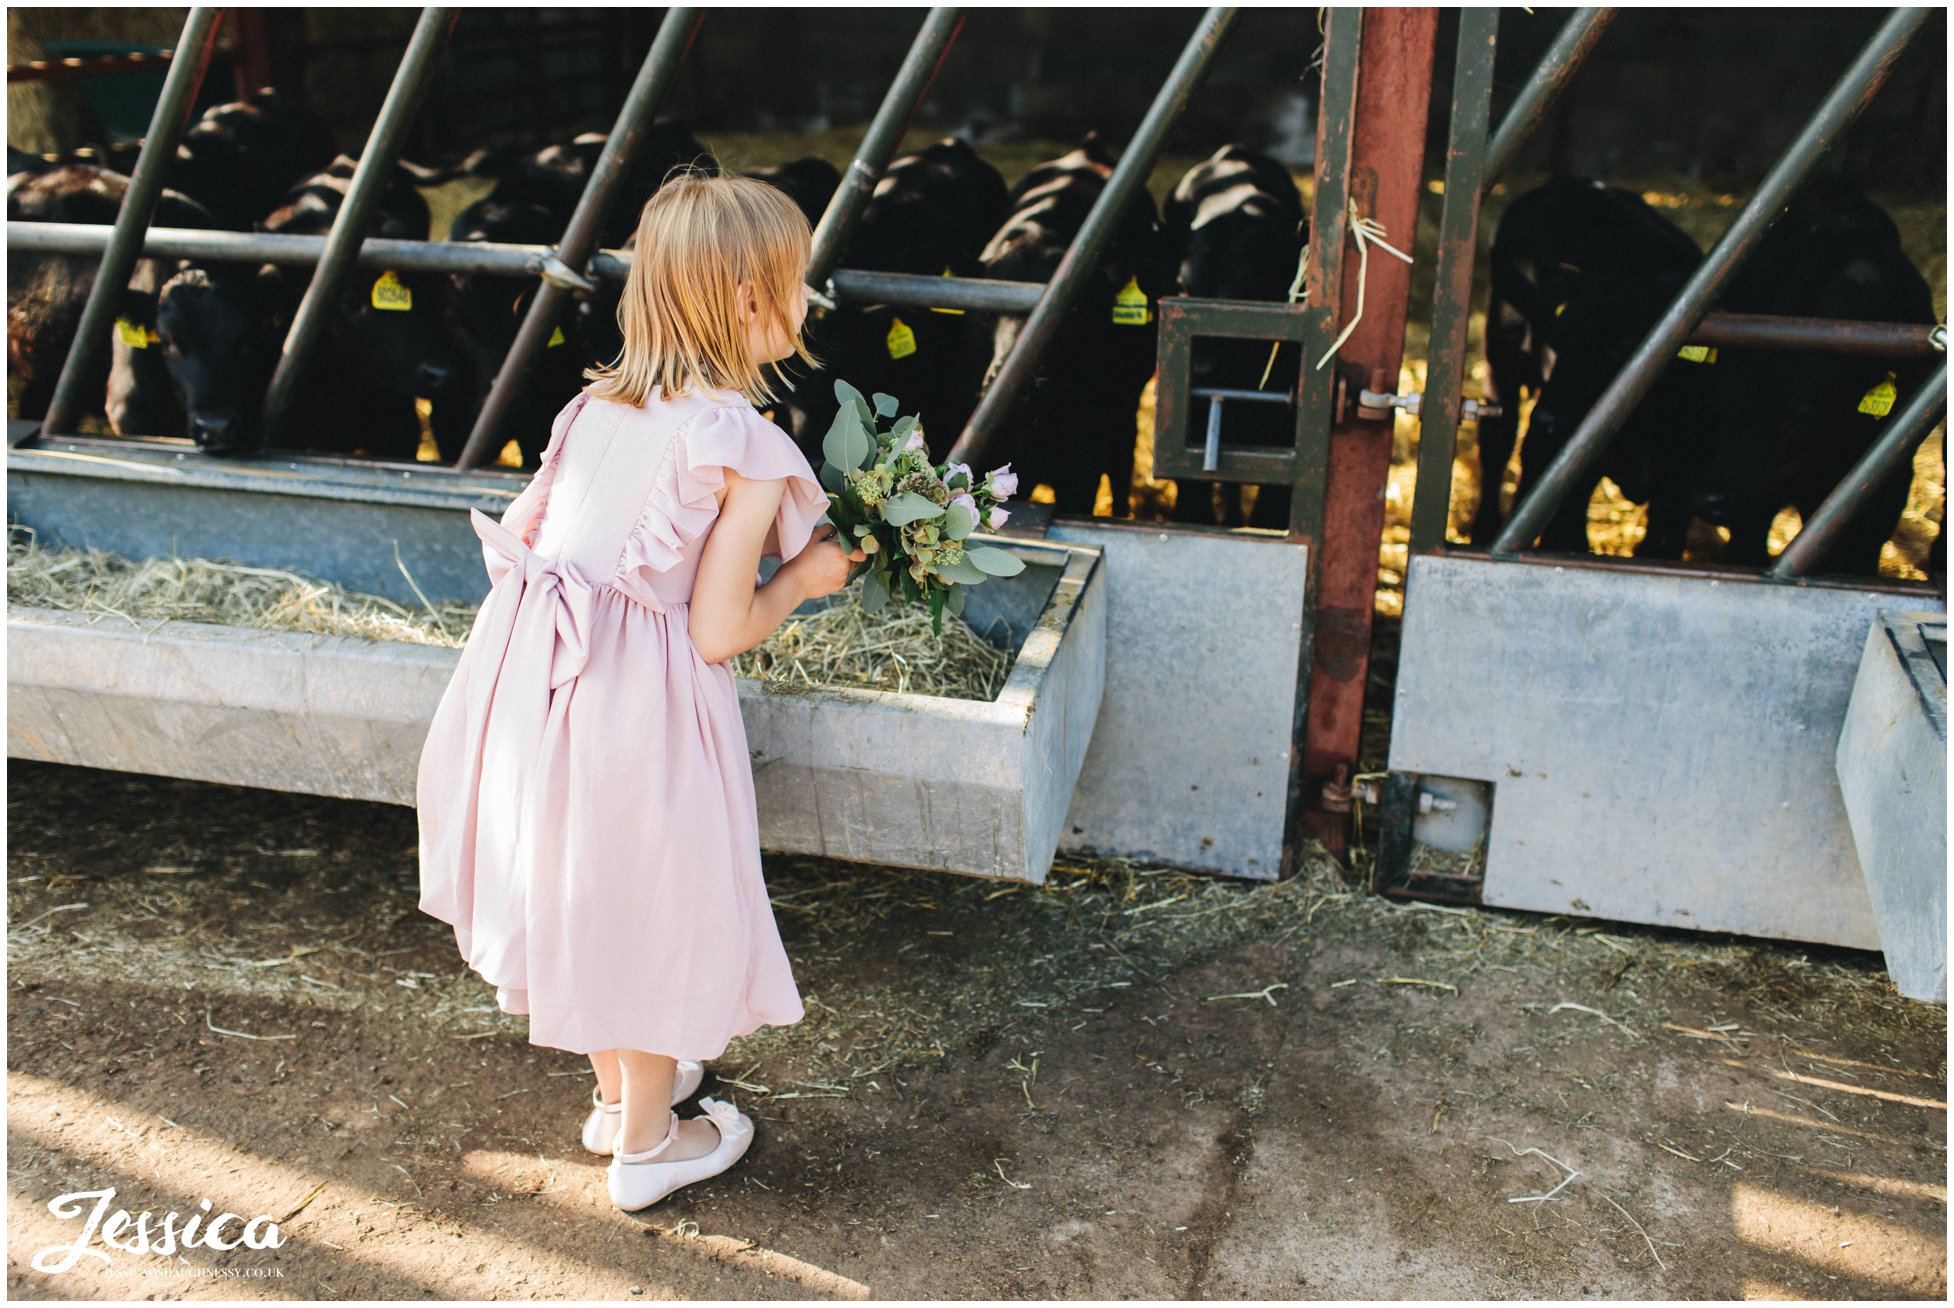 flower girls looks at the cows